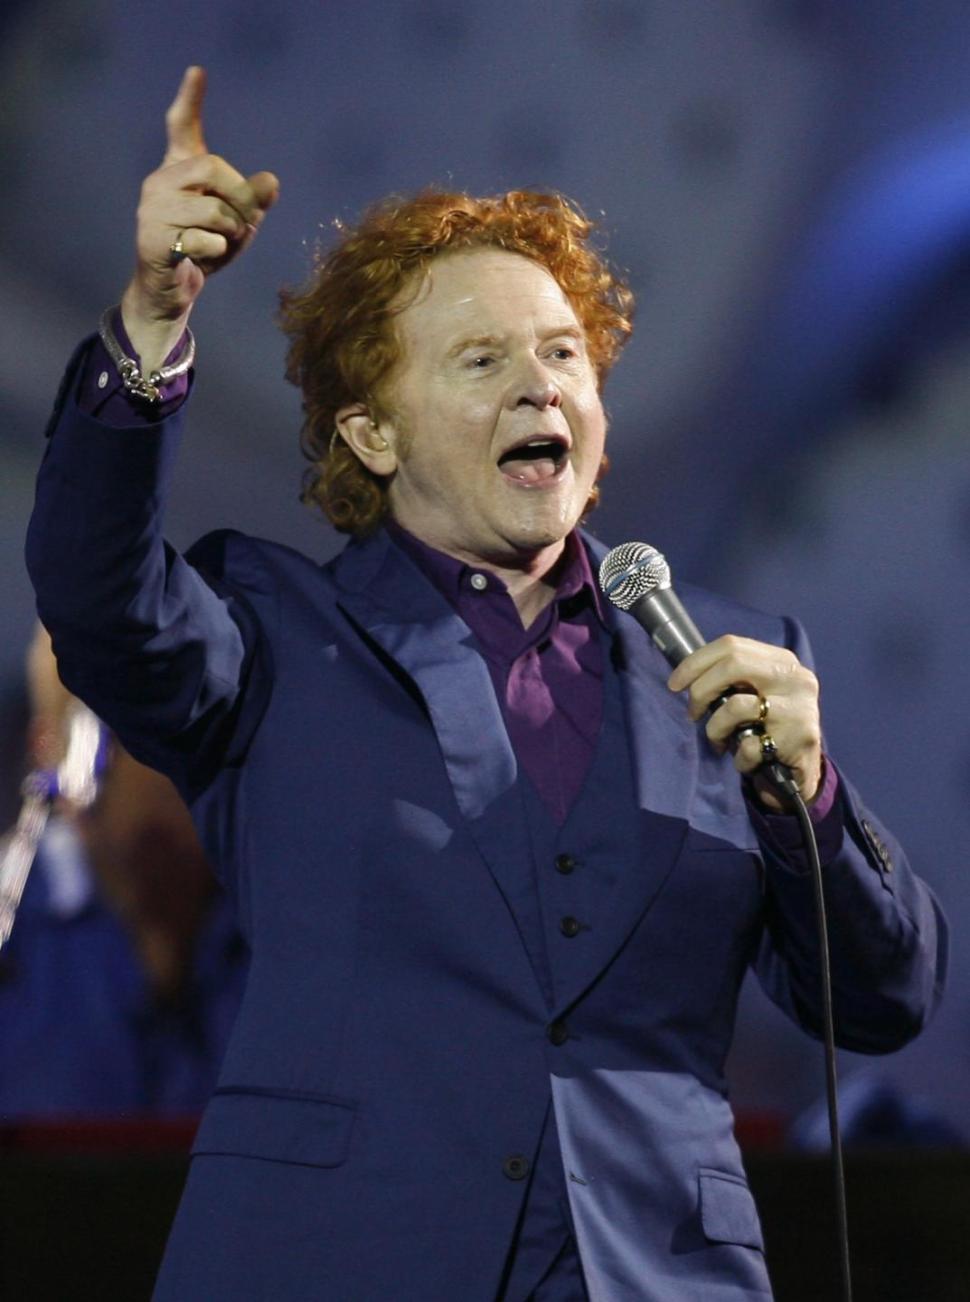 Mick Hucknall, lead singer of Simply Red, performs during the 50th International Song Festival in Chile.